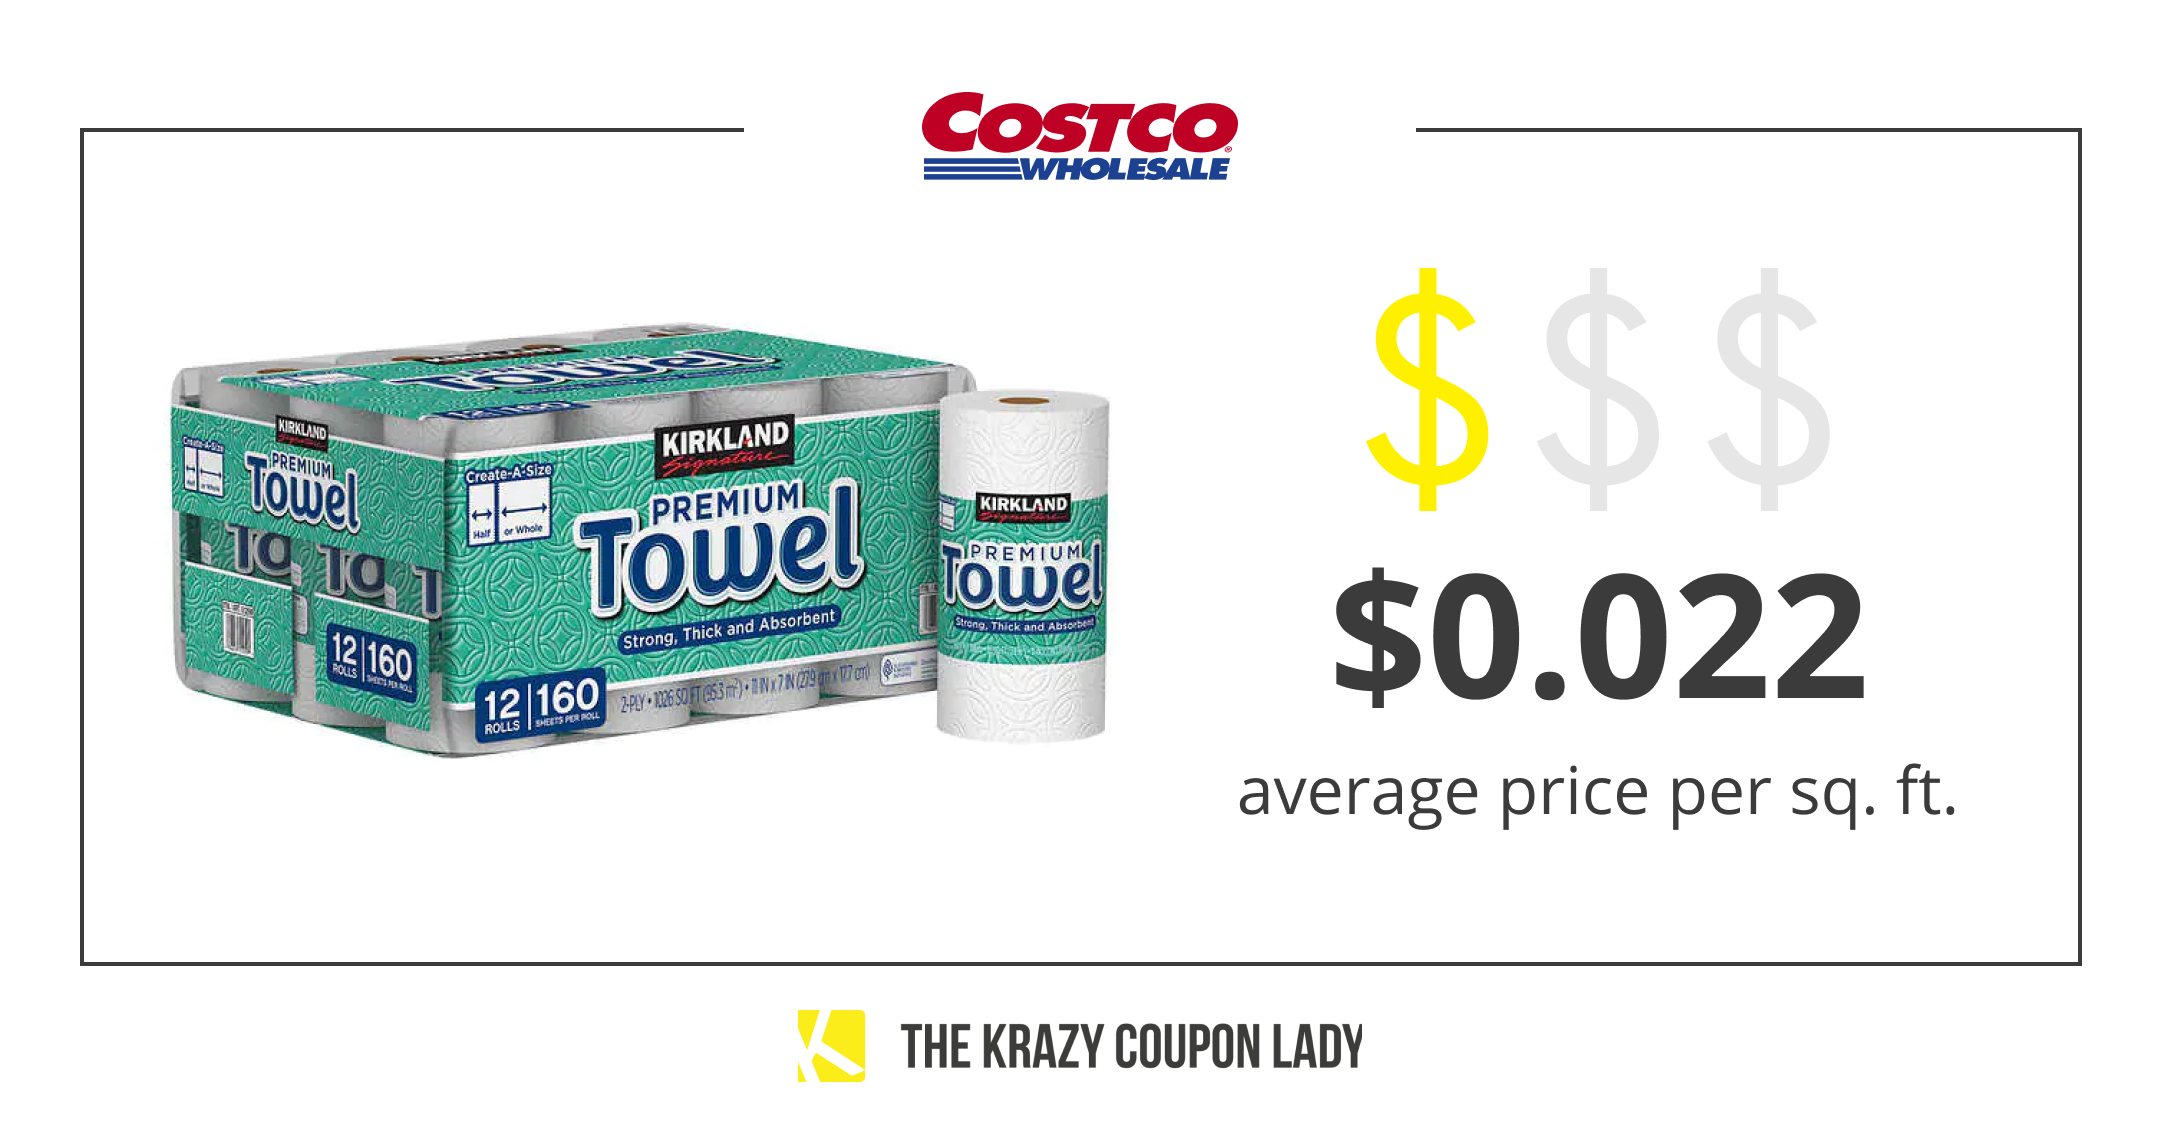 https://prod-cdn.thekrazycouponlady.com/wp-content/uploads/2022/02/get-cheapest-paper-towels-costco-price-square-foot-graphic-1673982986-1673982986.png